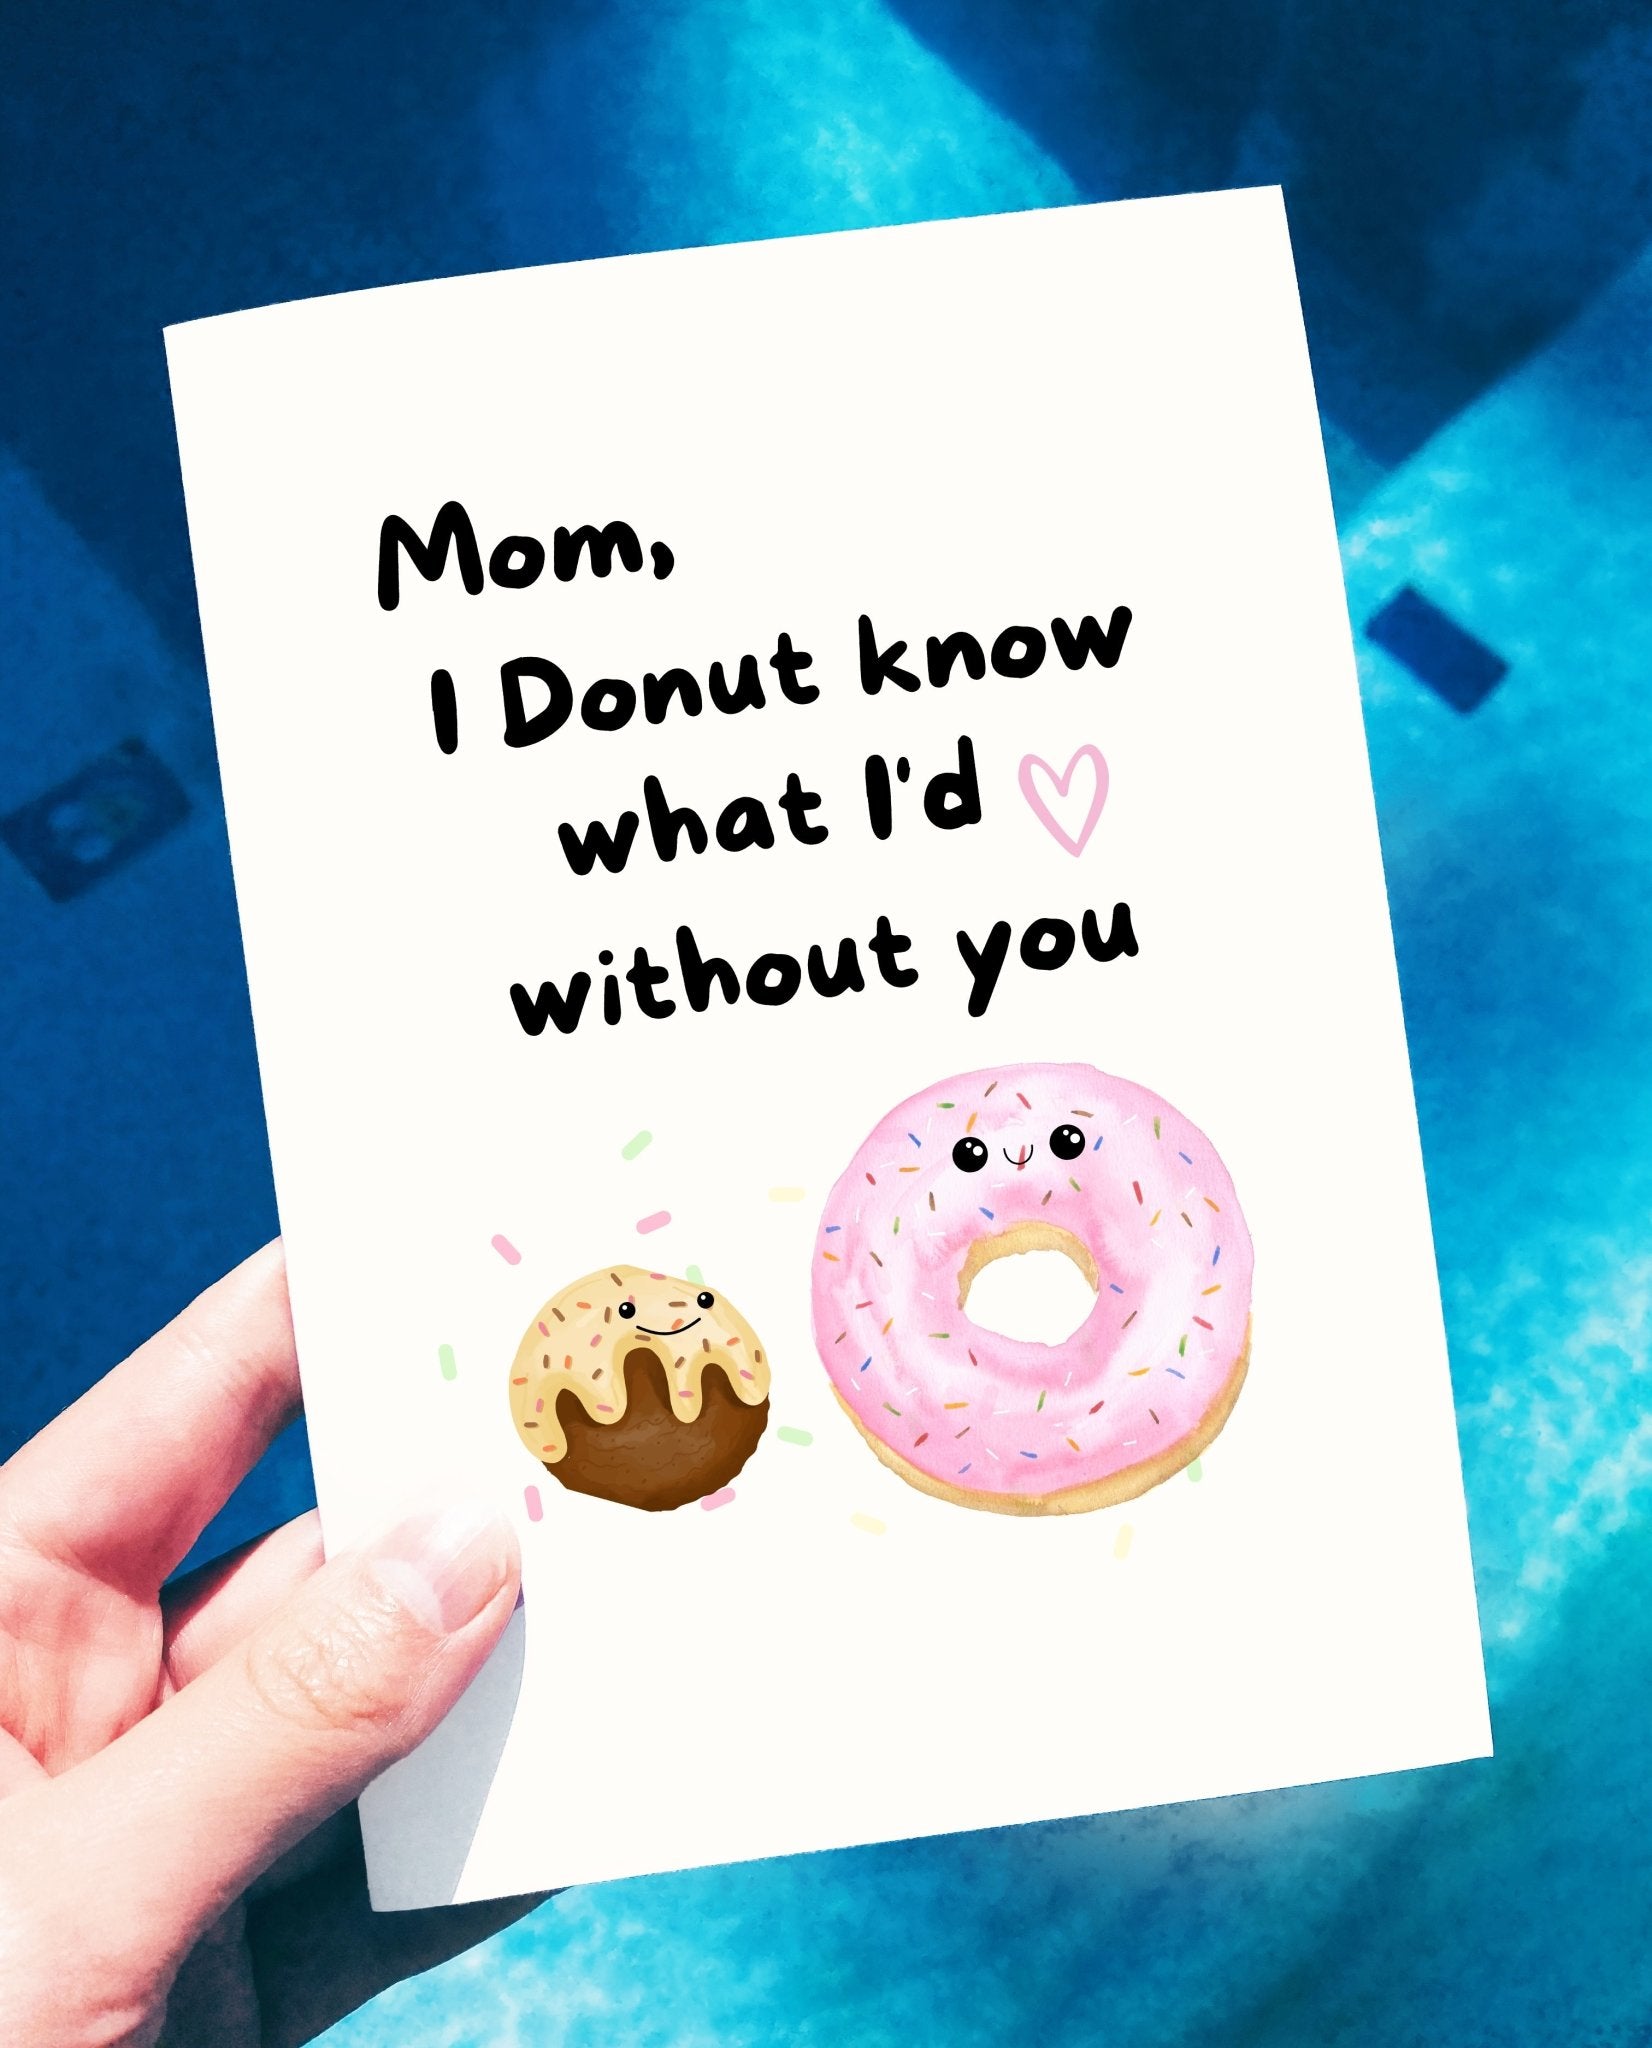 Mom I Donut Know What I'd Do Without You Greeting Card - UntamedEgo LLC.